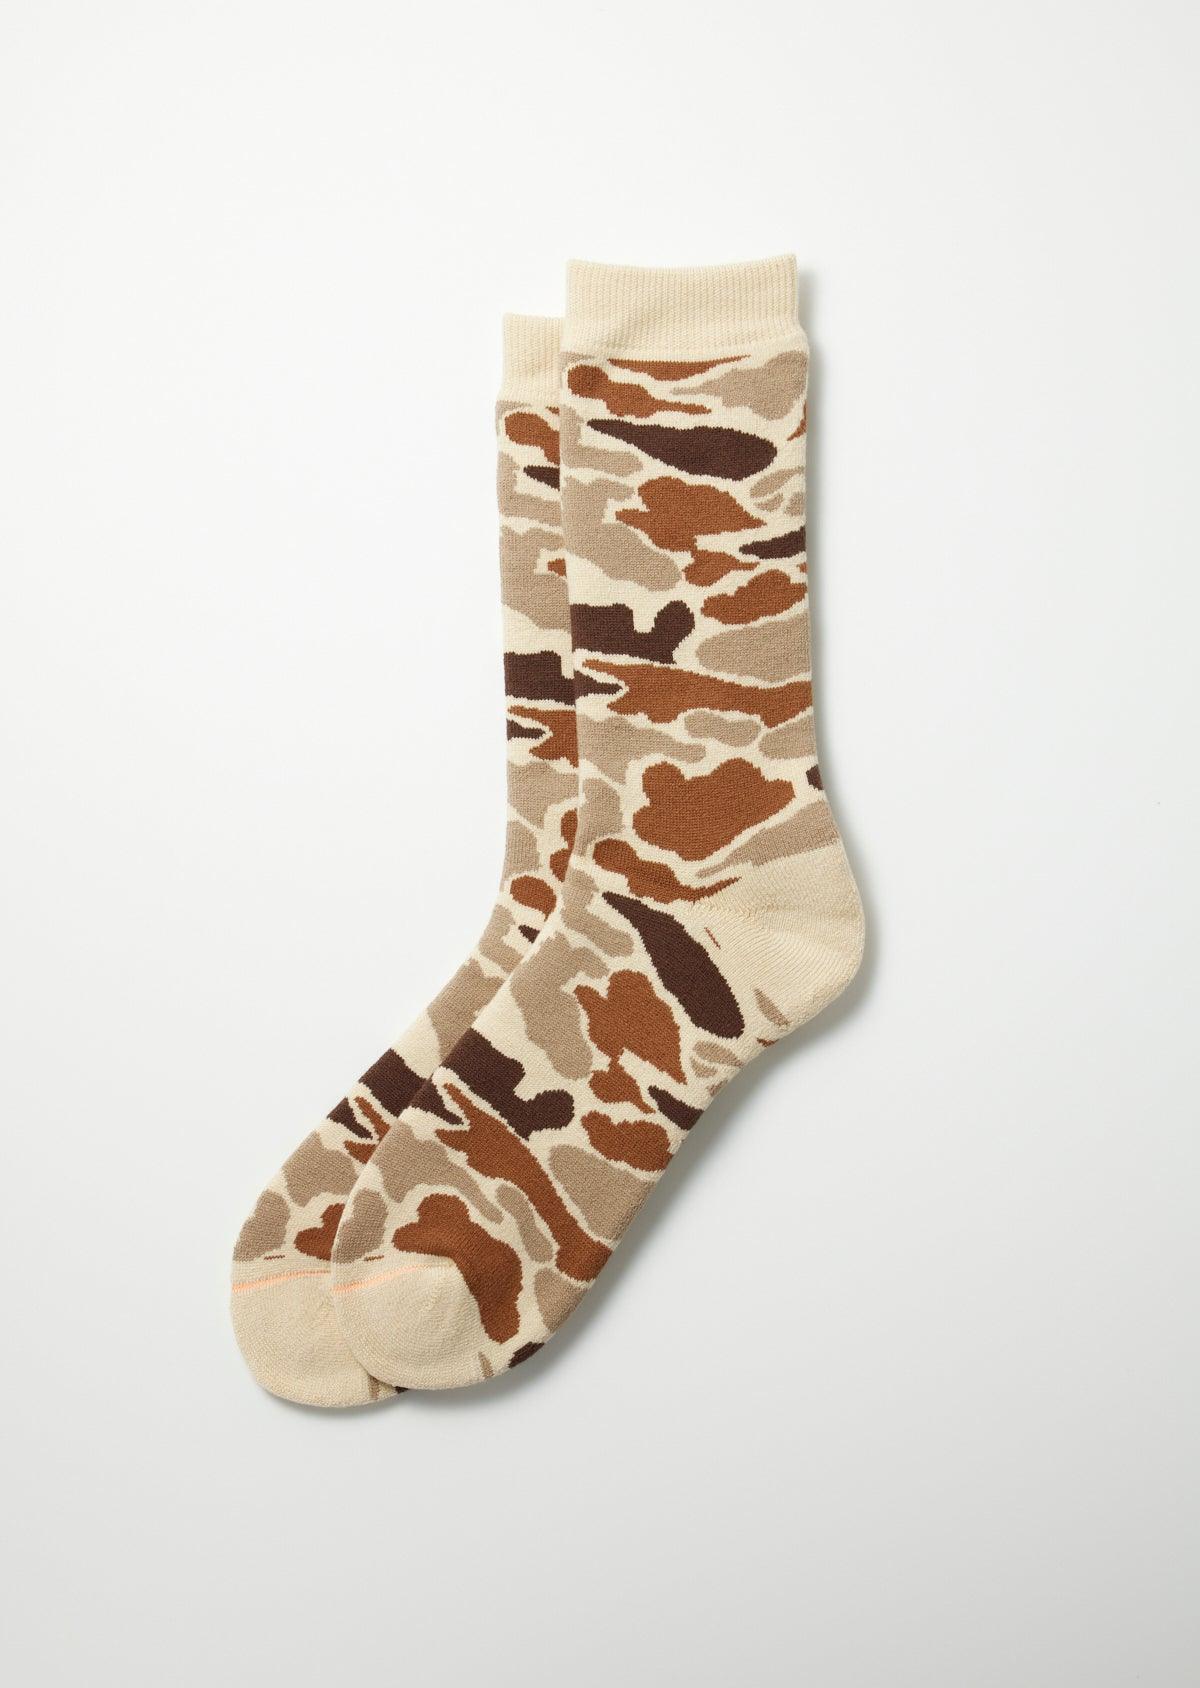 Rototo Pile Camo Crew Socks - Guilty Party